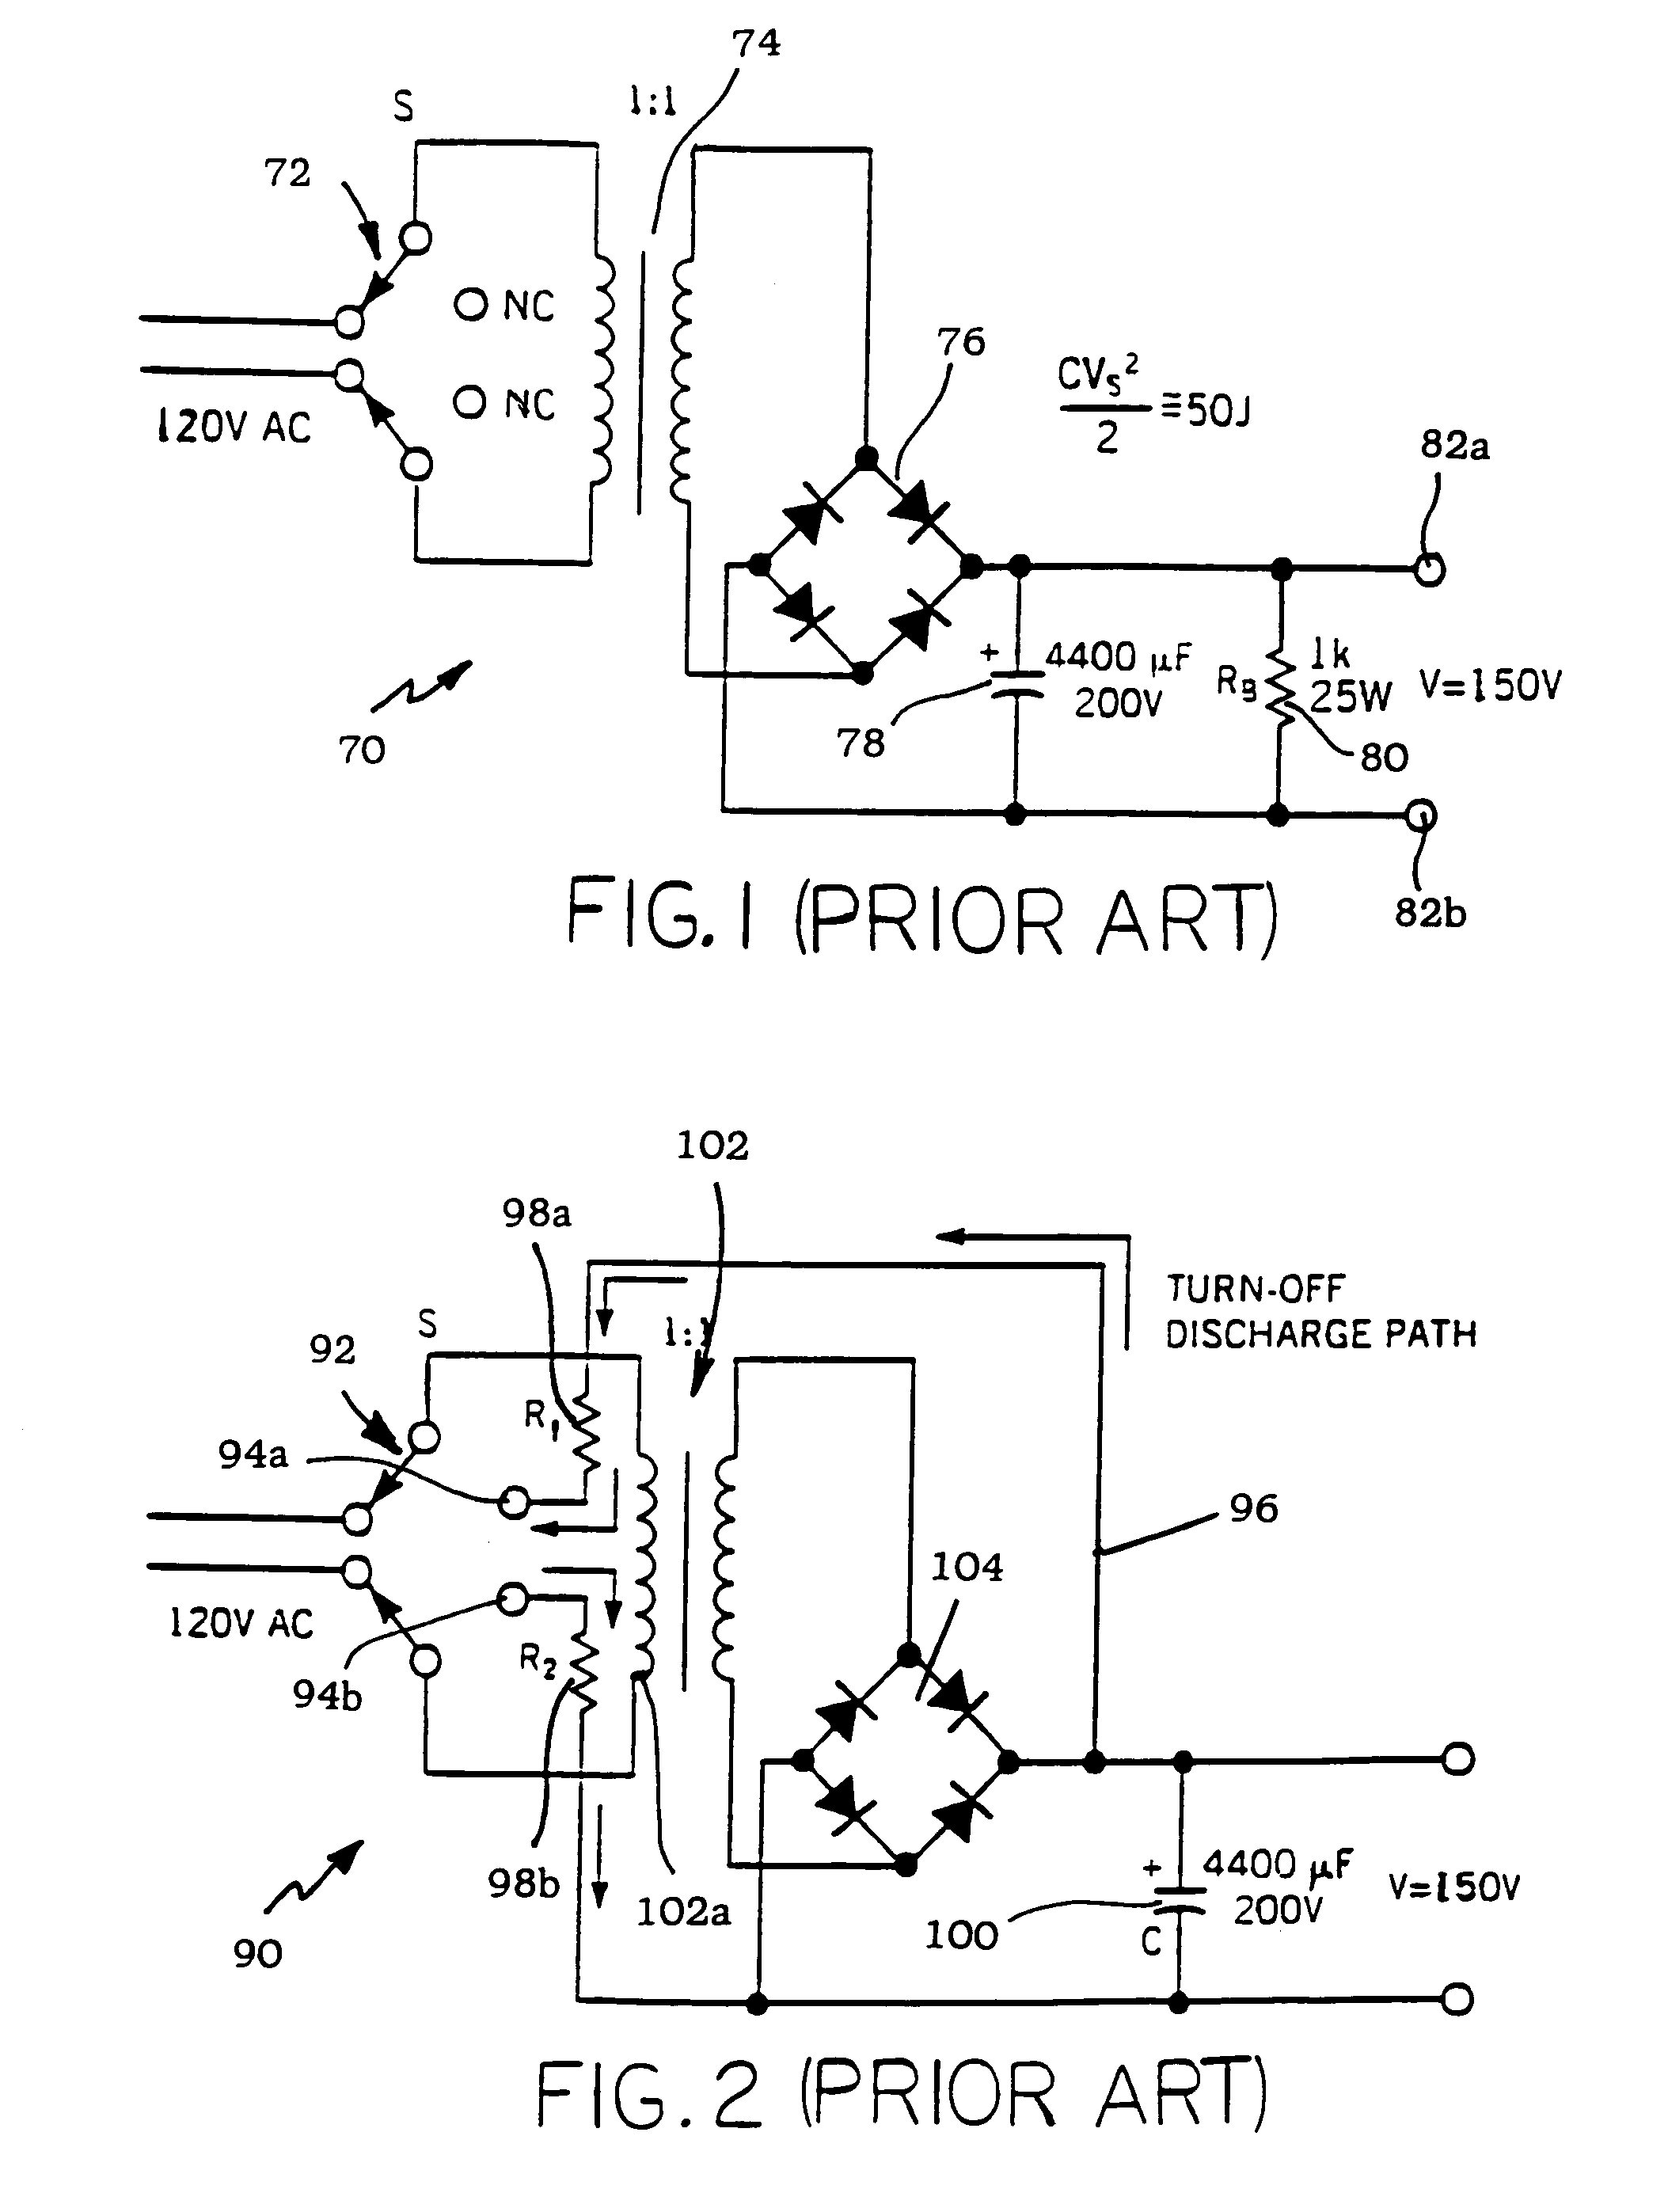 Automatic capacitor discharge for power supplies